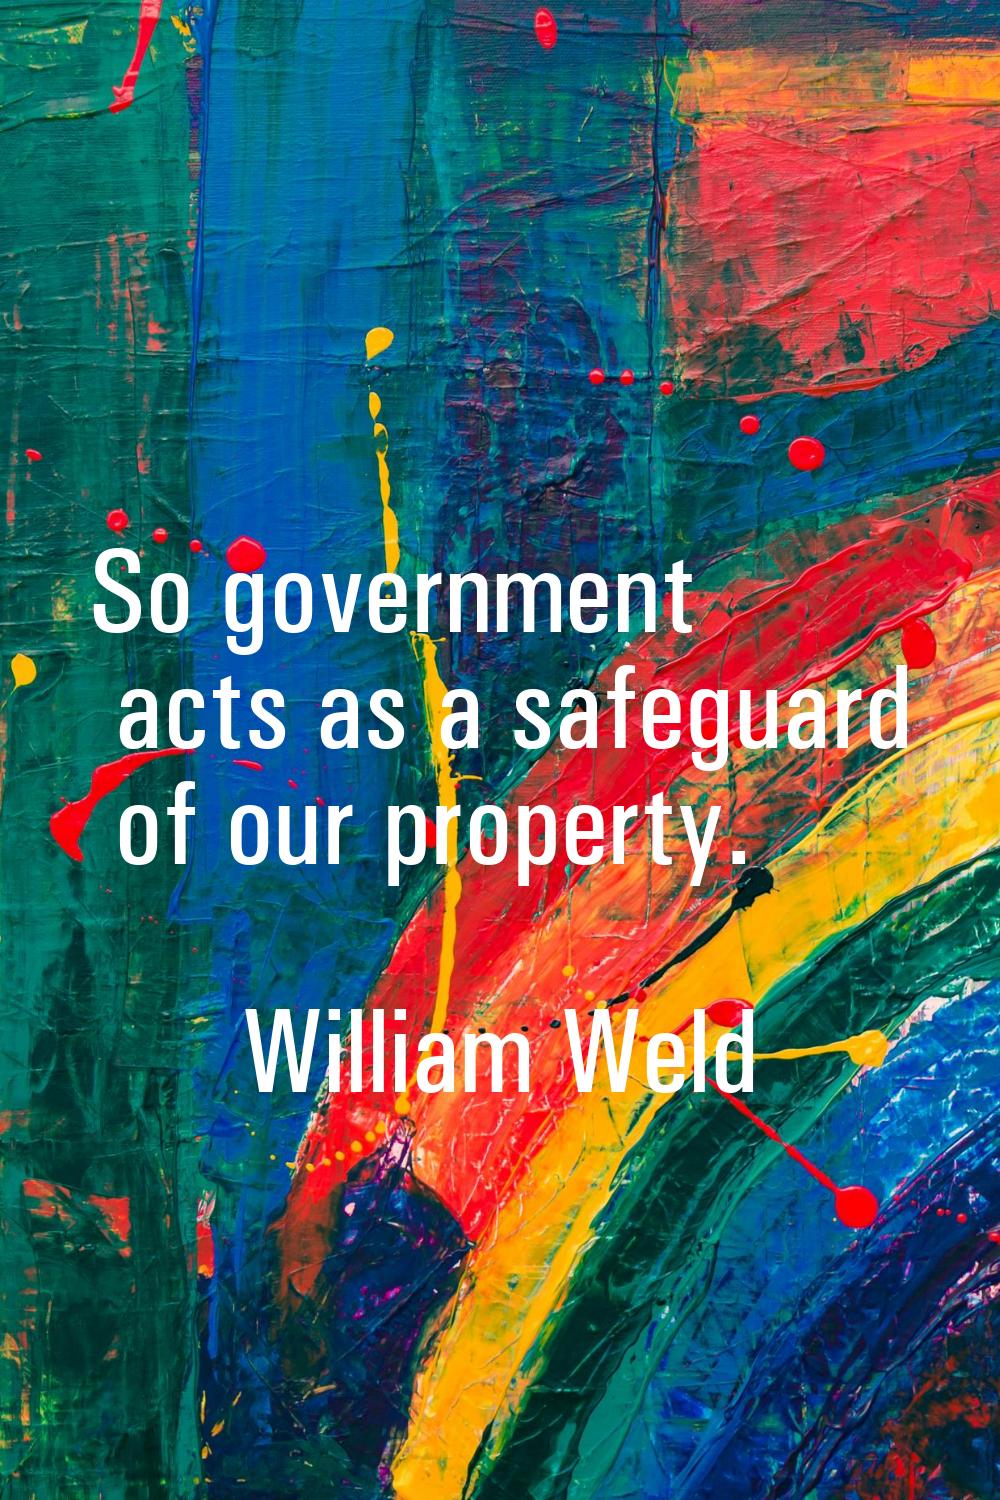 So government acts as a safeguard of our property.